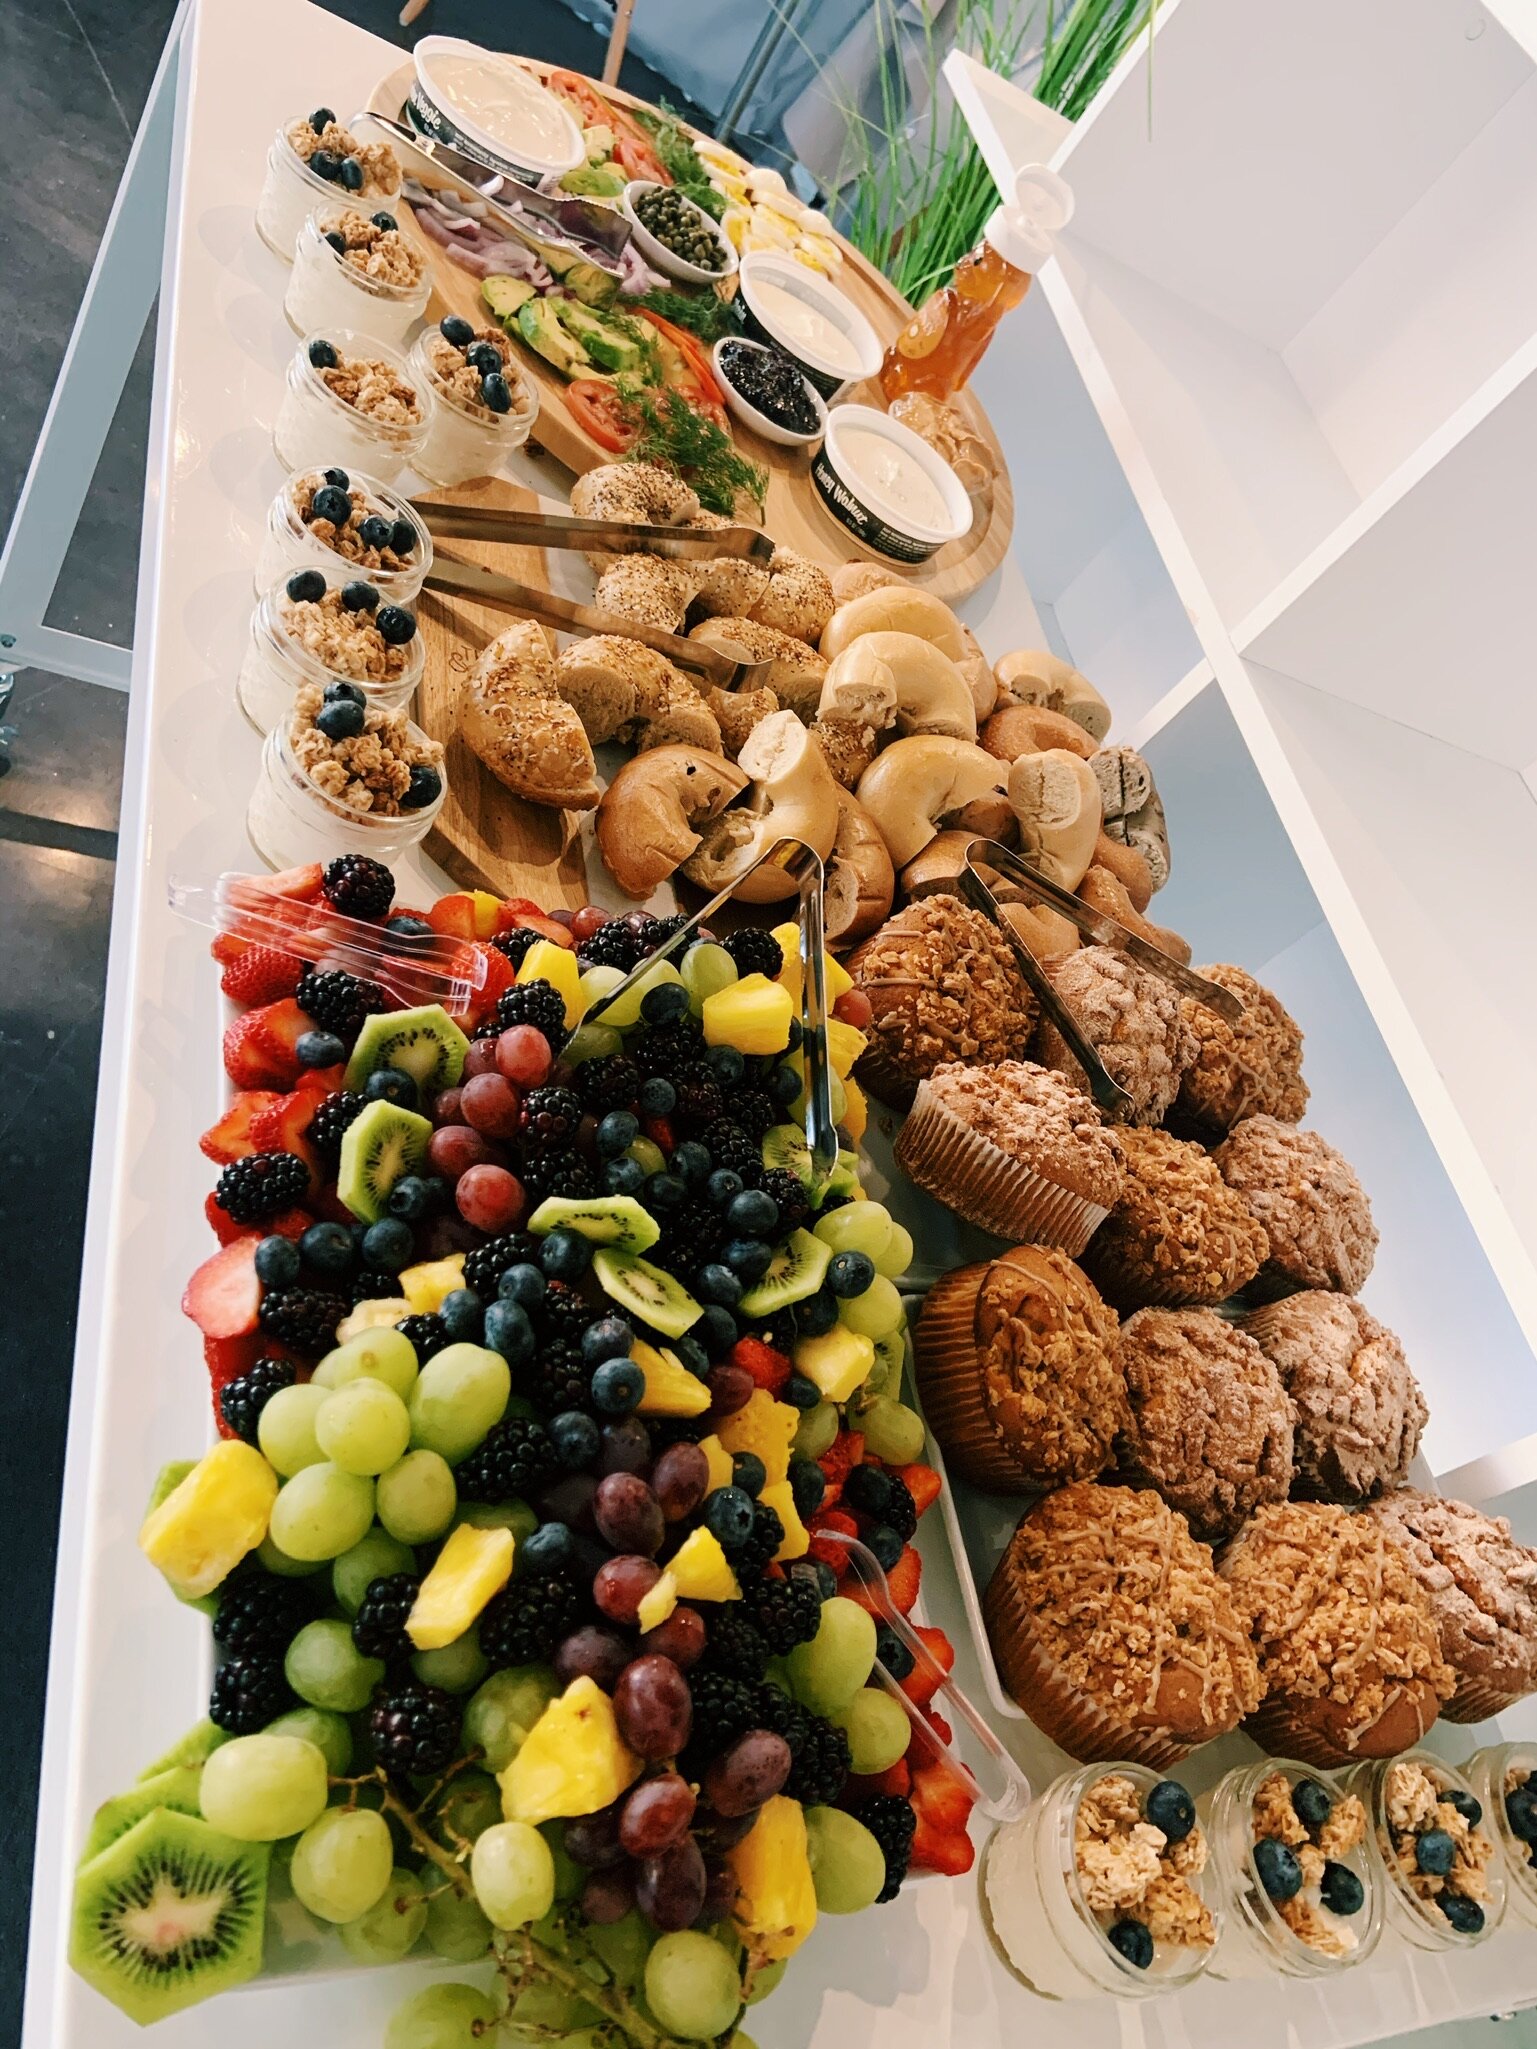 Event-venue-Charcuterie board-continental breakfast-lunch-dinner-brunch-buffet-Omaha-snacks-desserts-sweets-hors d’oeuvres-appetizers-parties